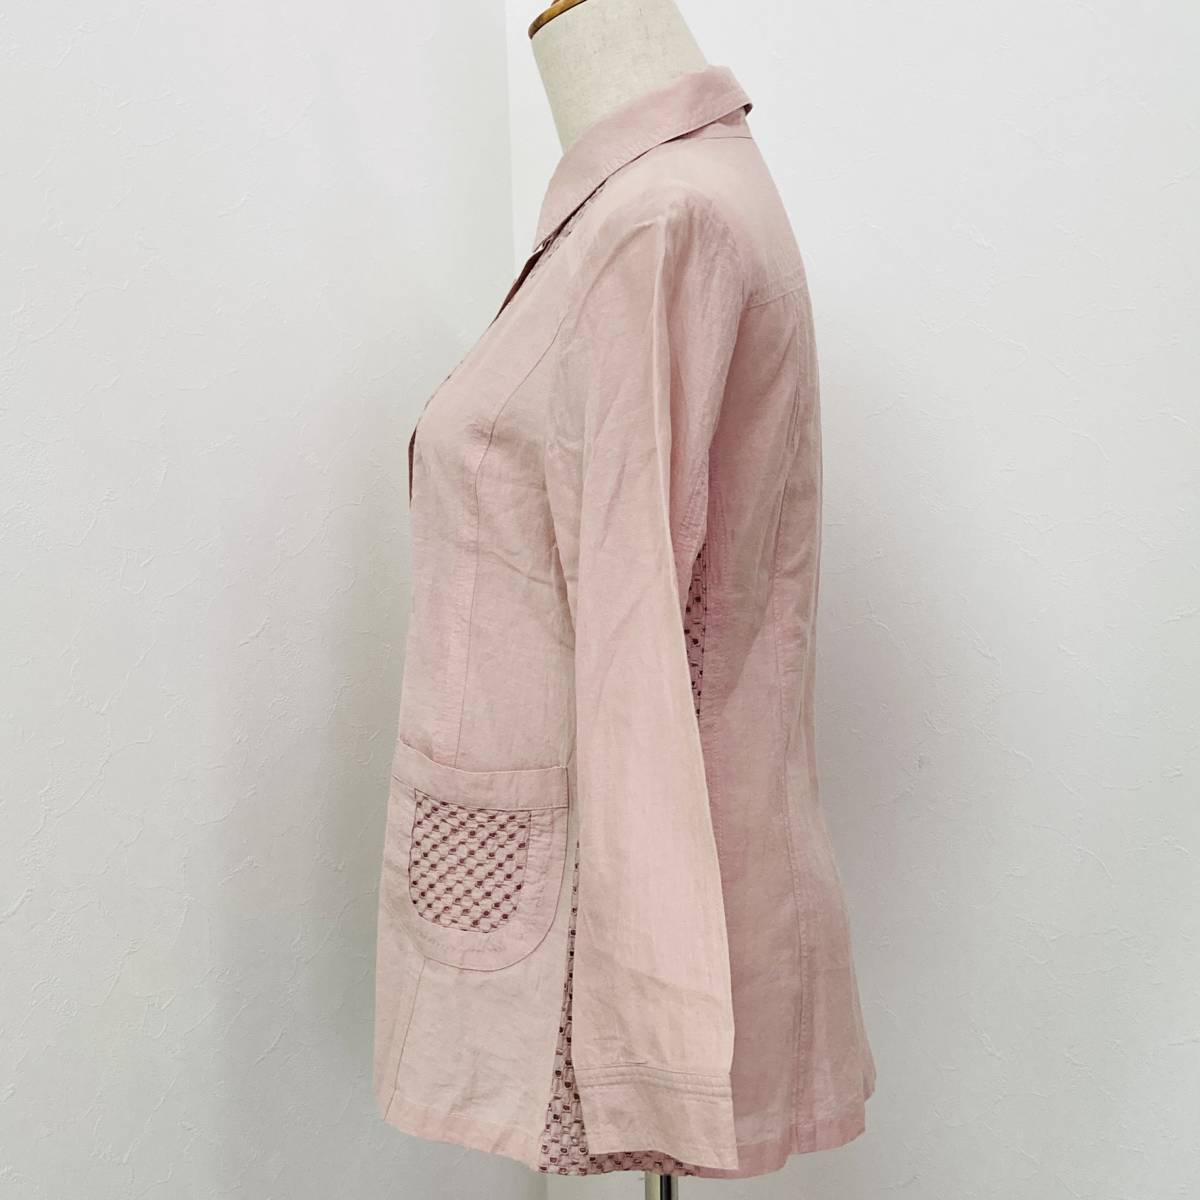 a00541 beautiful goods . flax .. jacket blouse shirt long sleeve thin shoulder pad attaching embroidery size 9 pink cotton silk . lady's retro fine quality on goods all-purpose 